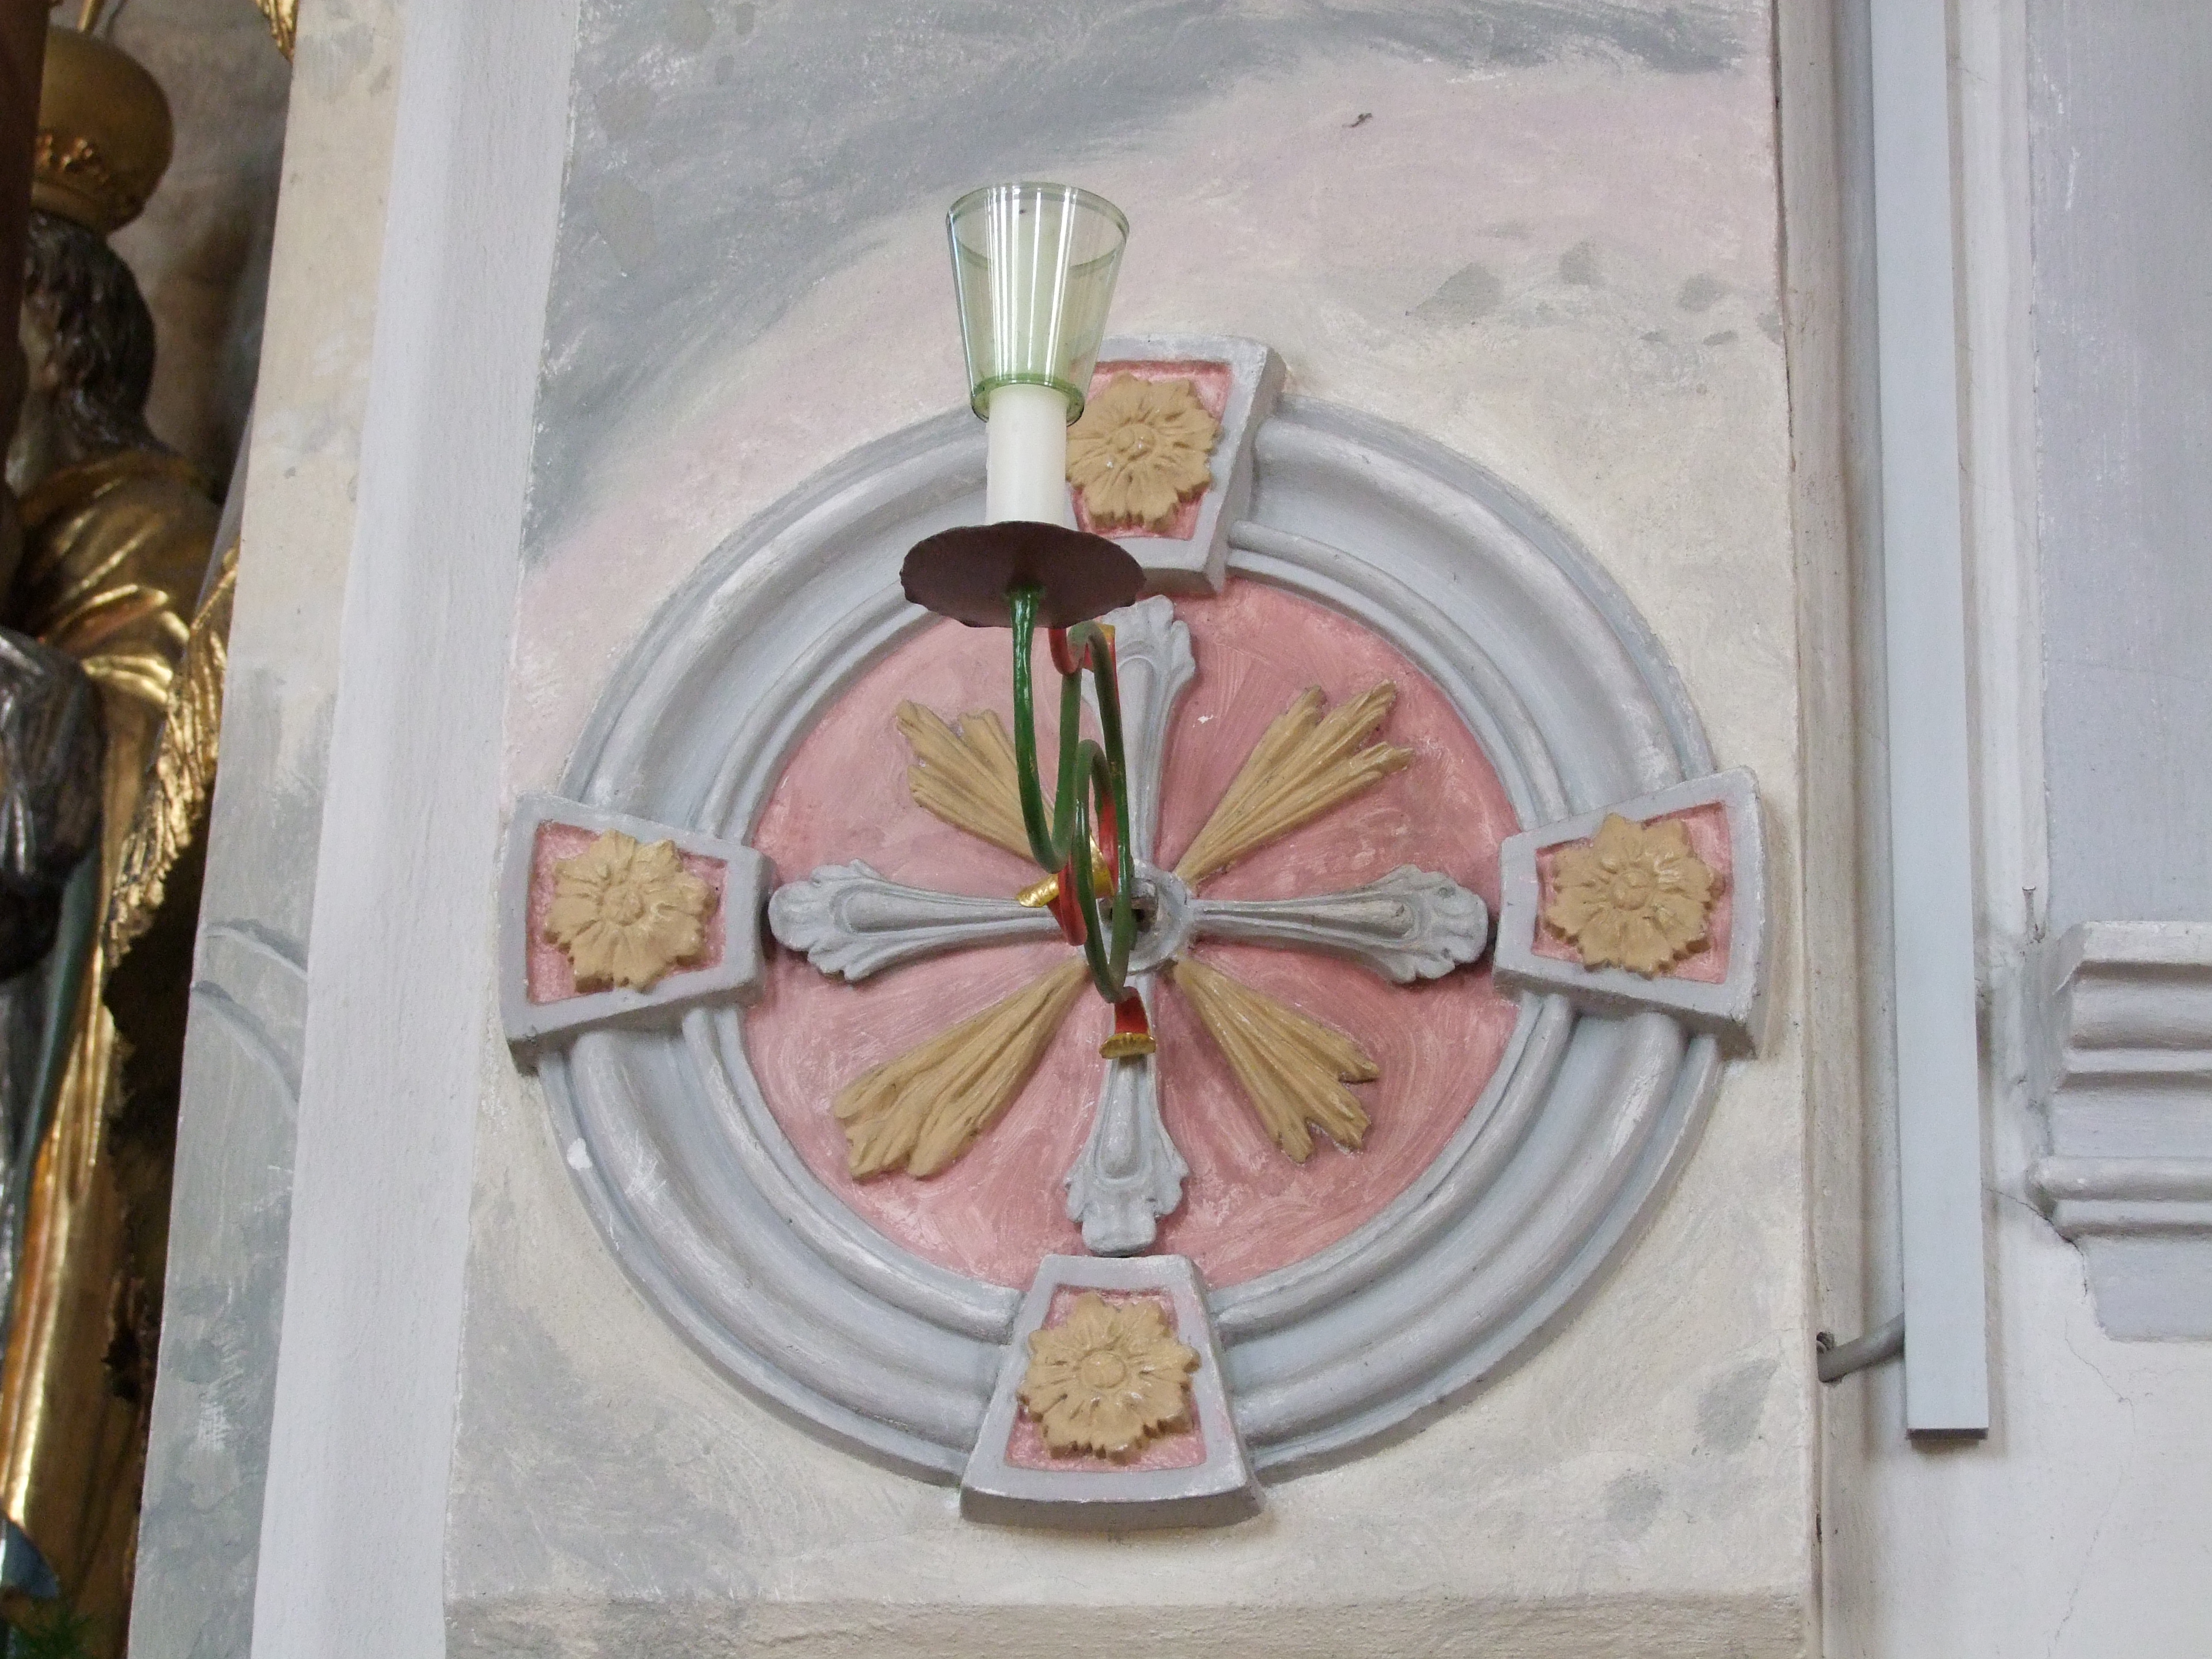 Consecration cross with candle